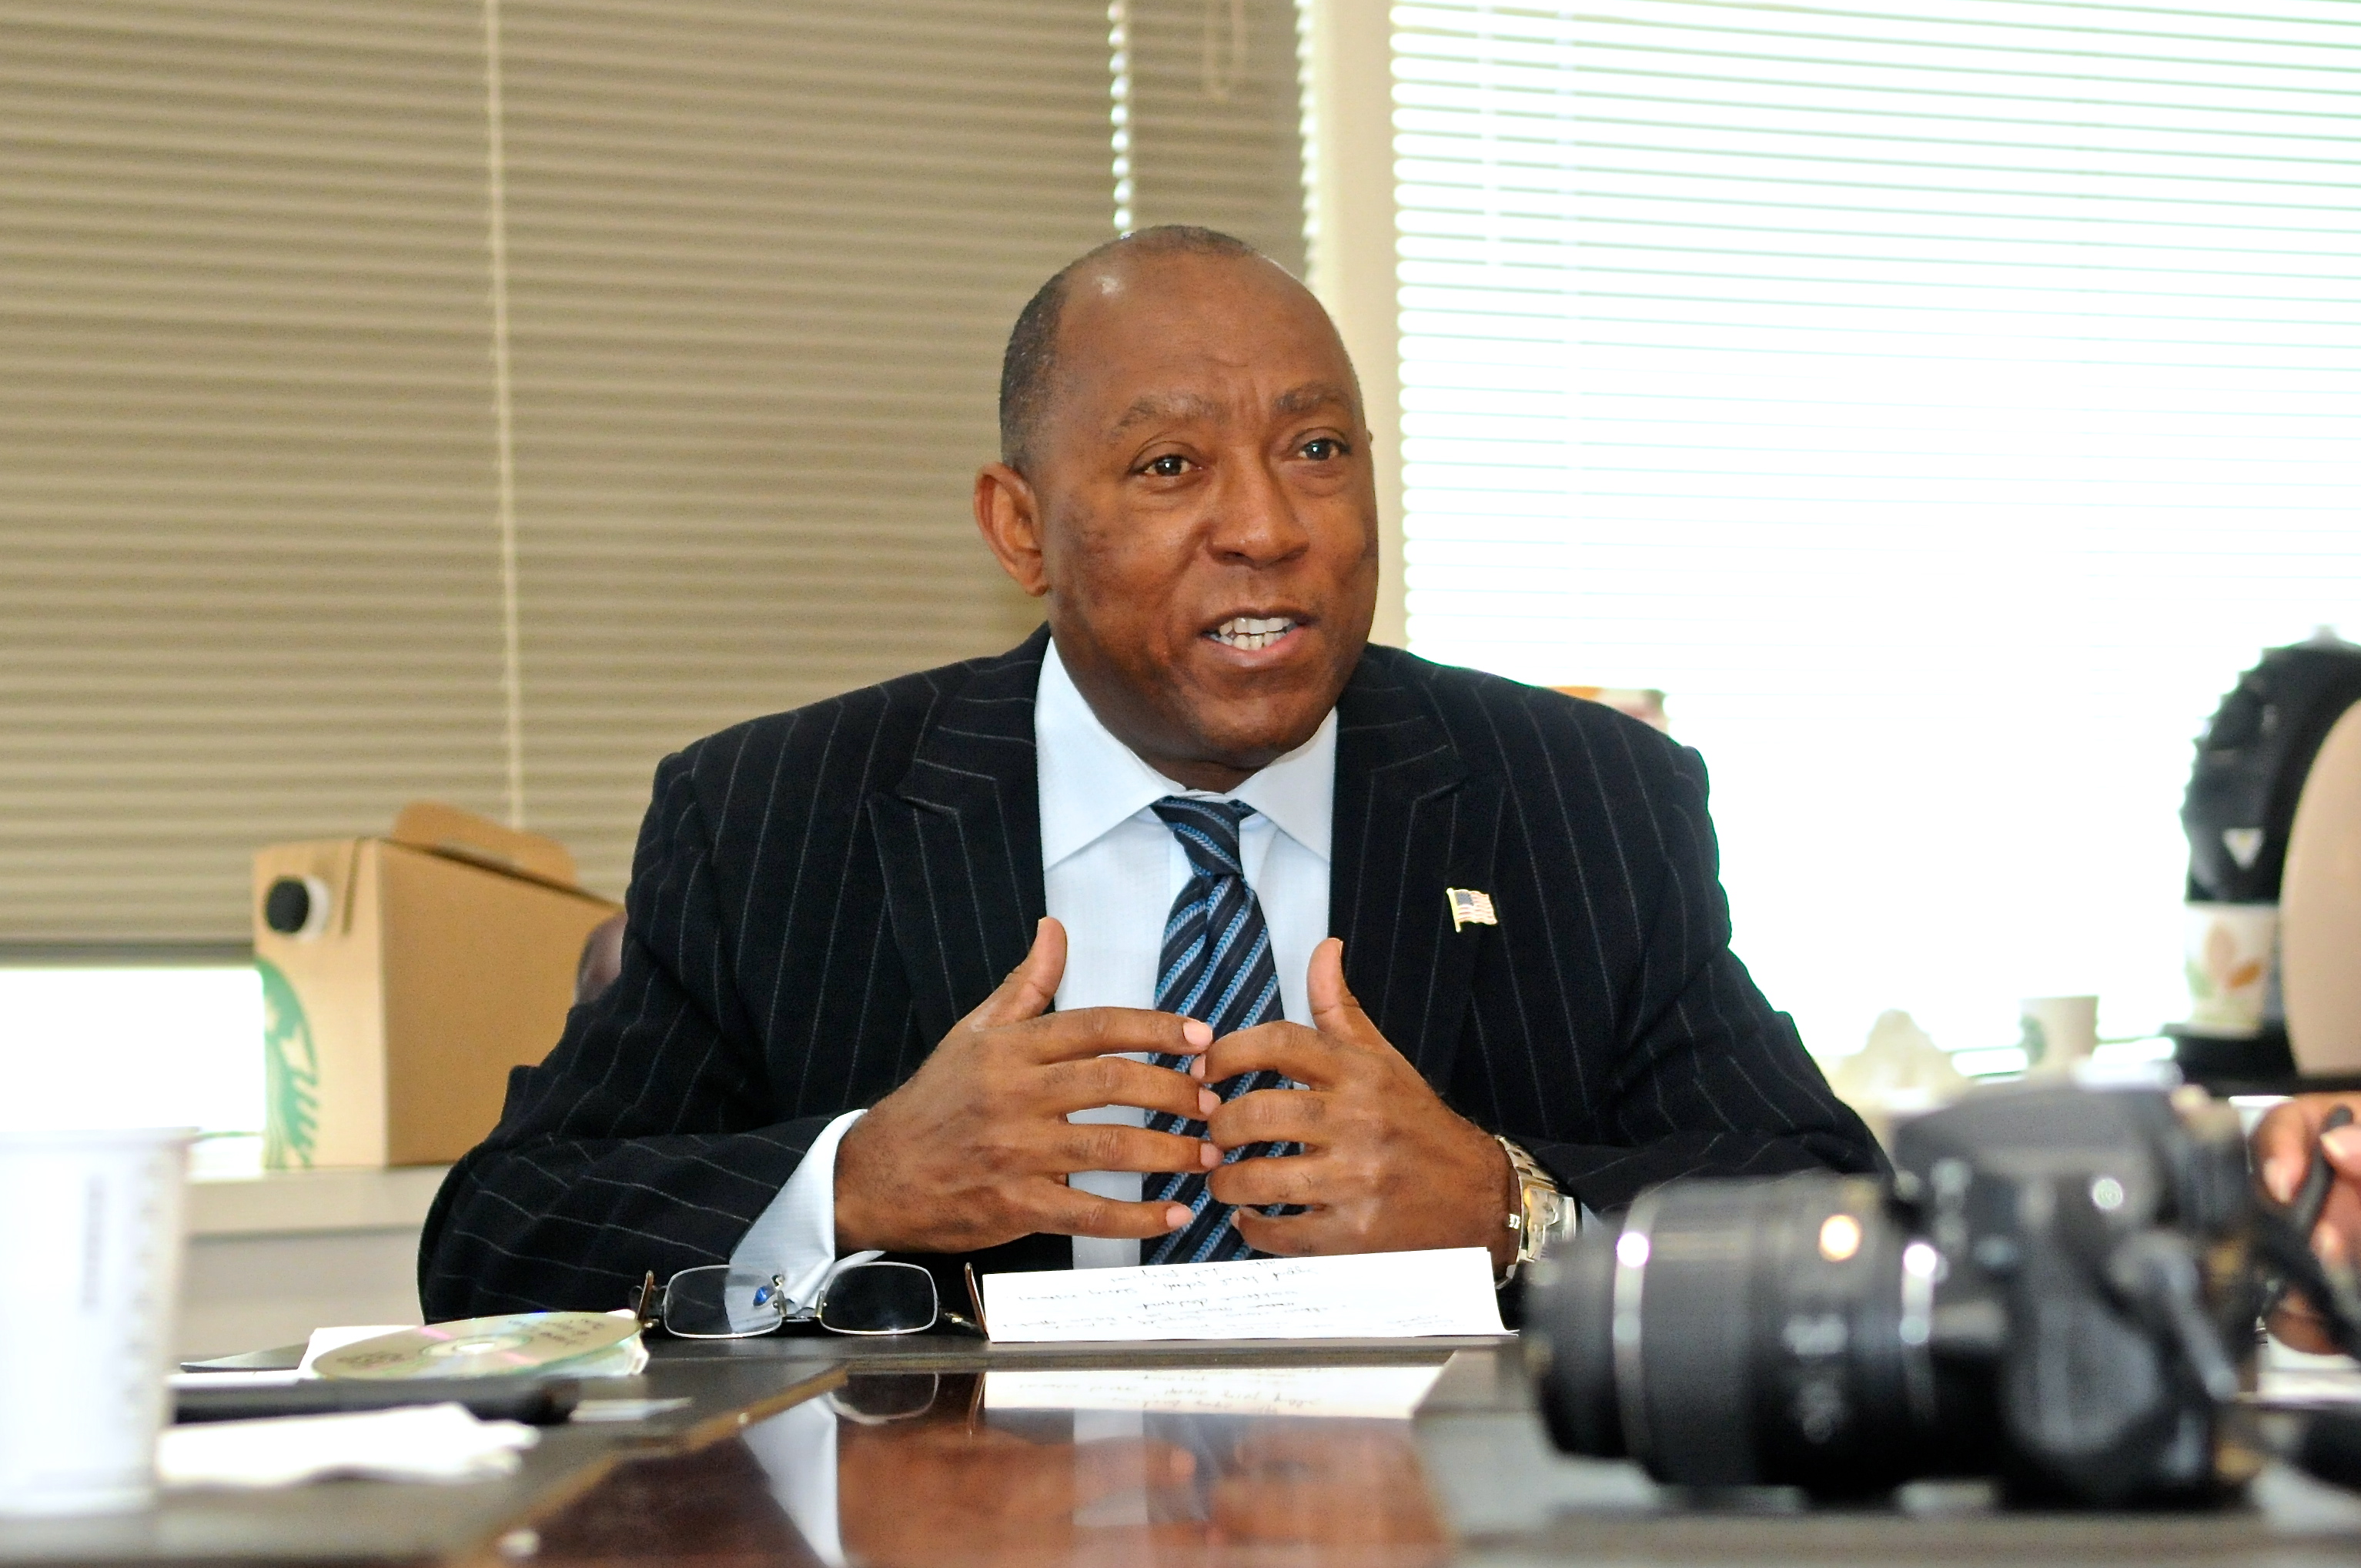 Sylvester Turner Announces He is Running to Be Houston's Next Mayor